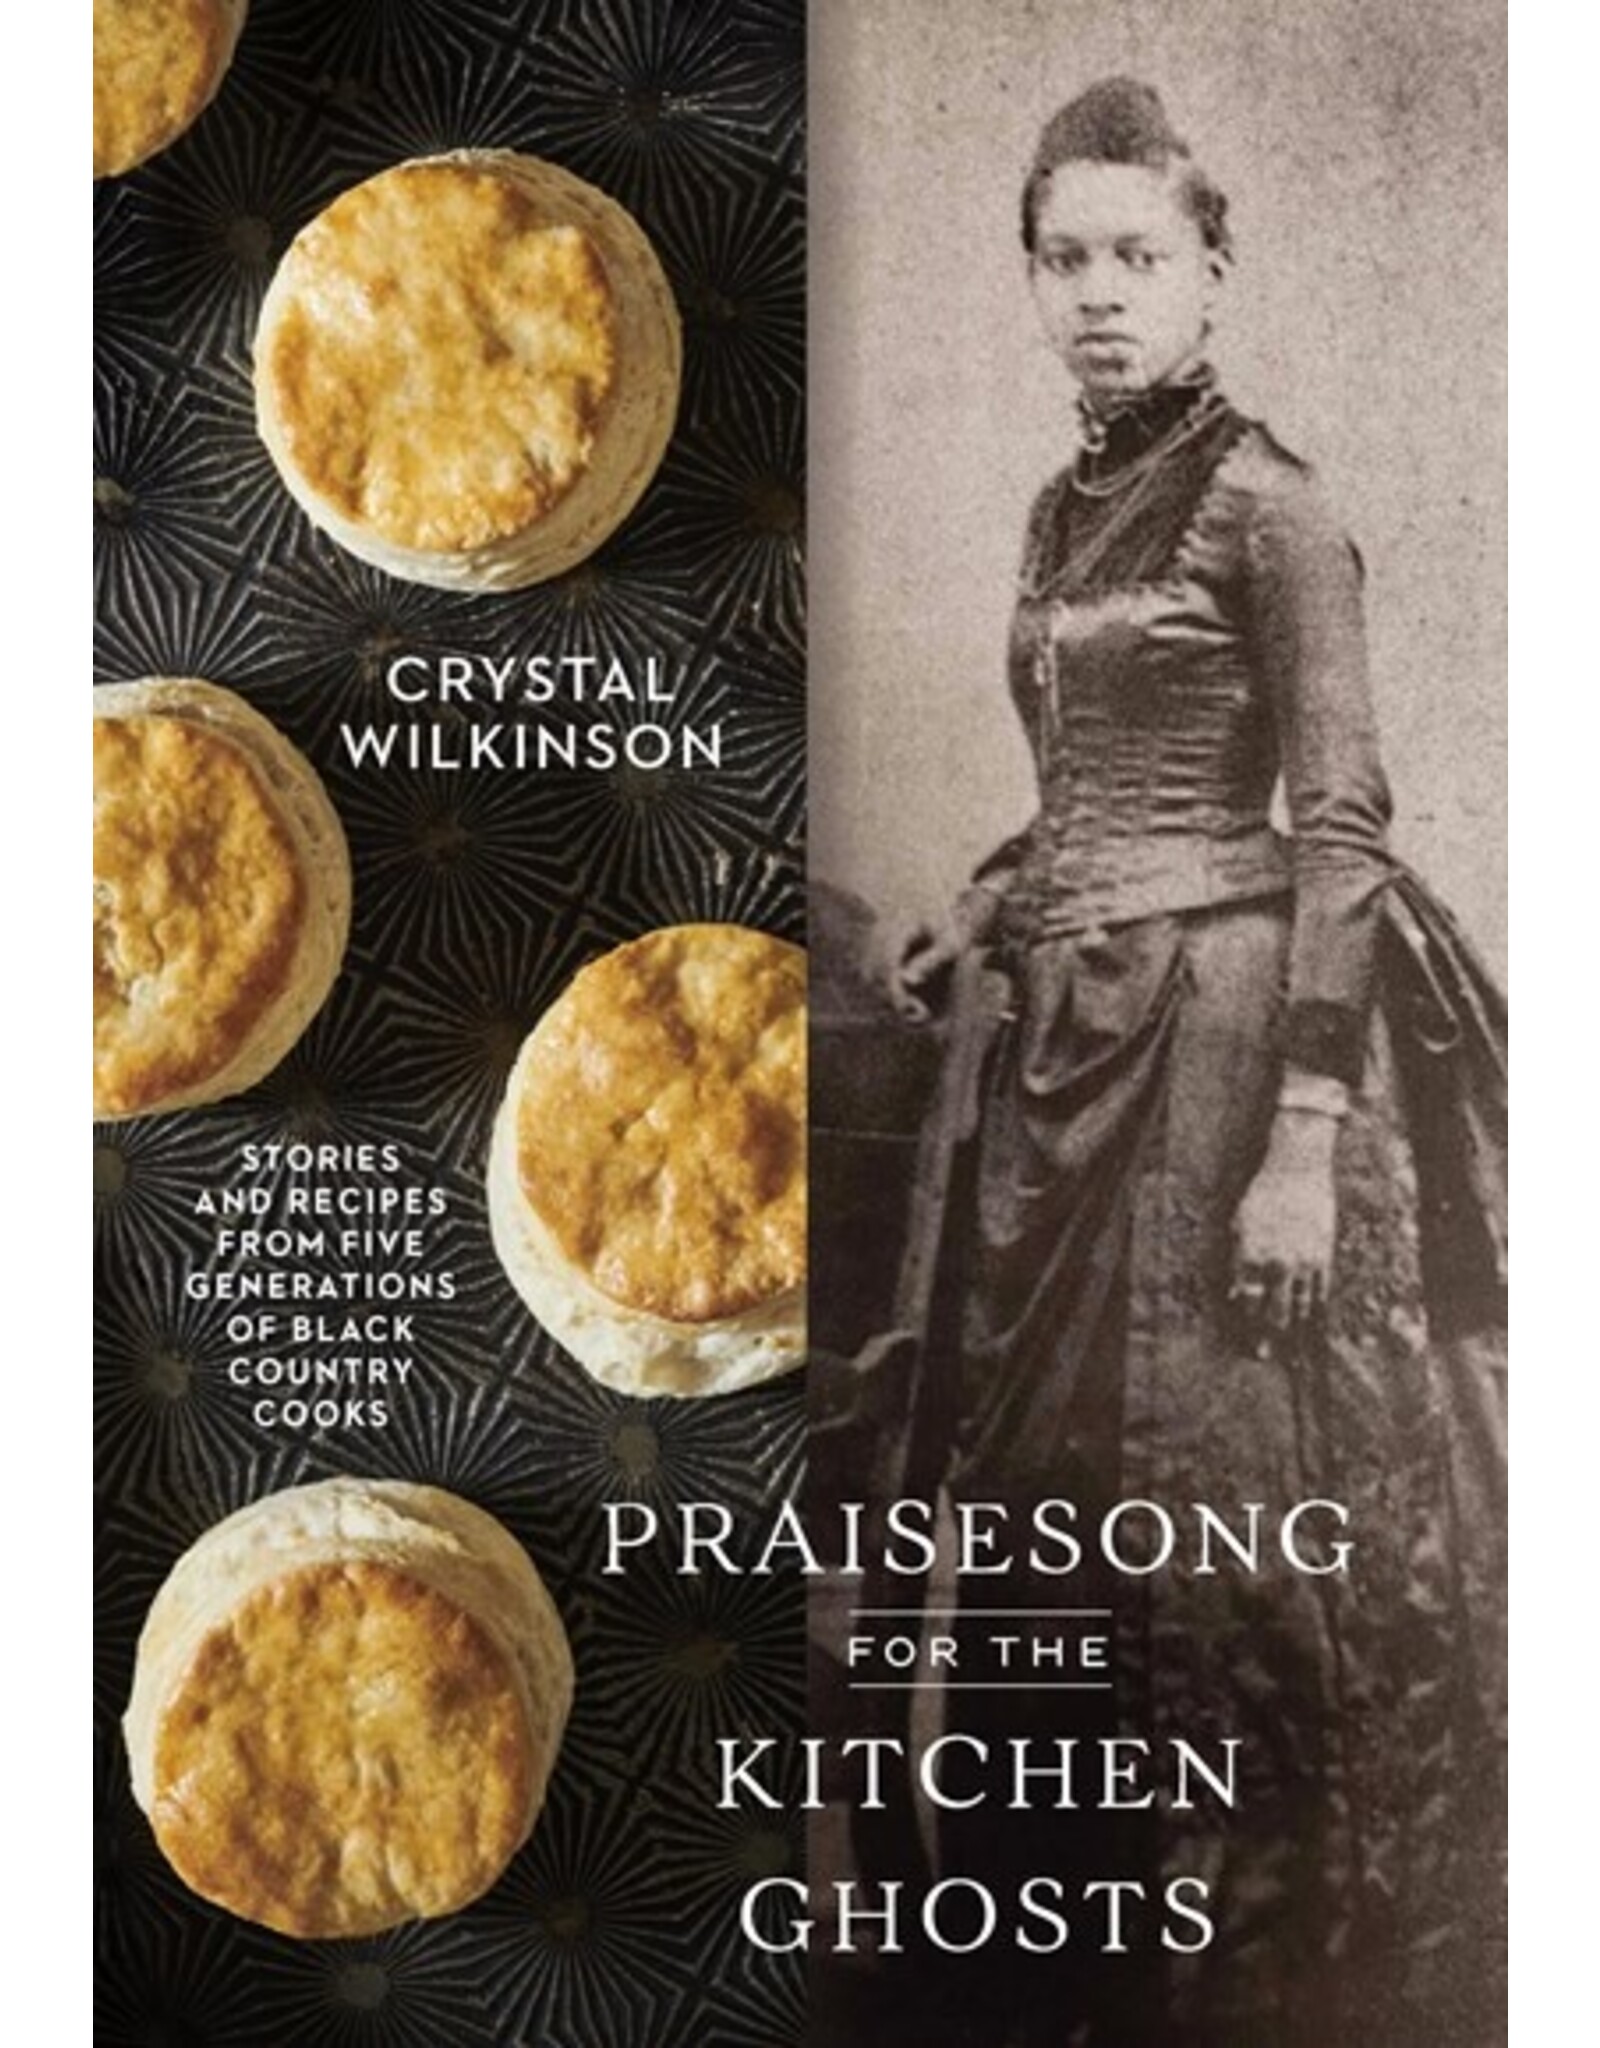 Books Praisesong for the Kitchen Ghosts : Stories and Recipes form Five Generations of Black Country Cooks by Crystal Wilkinson